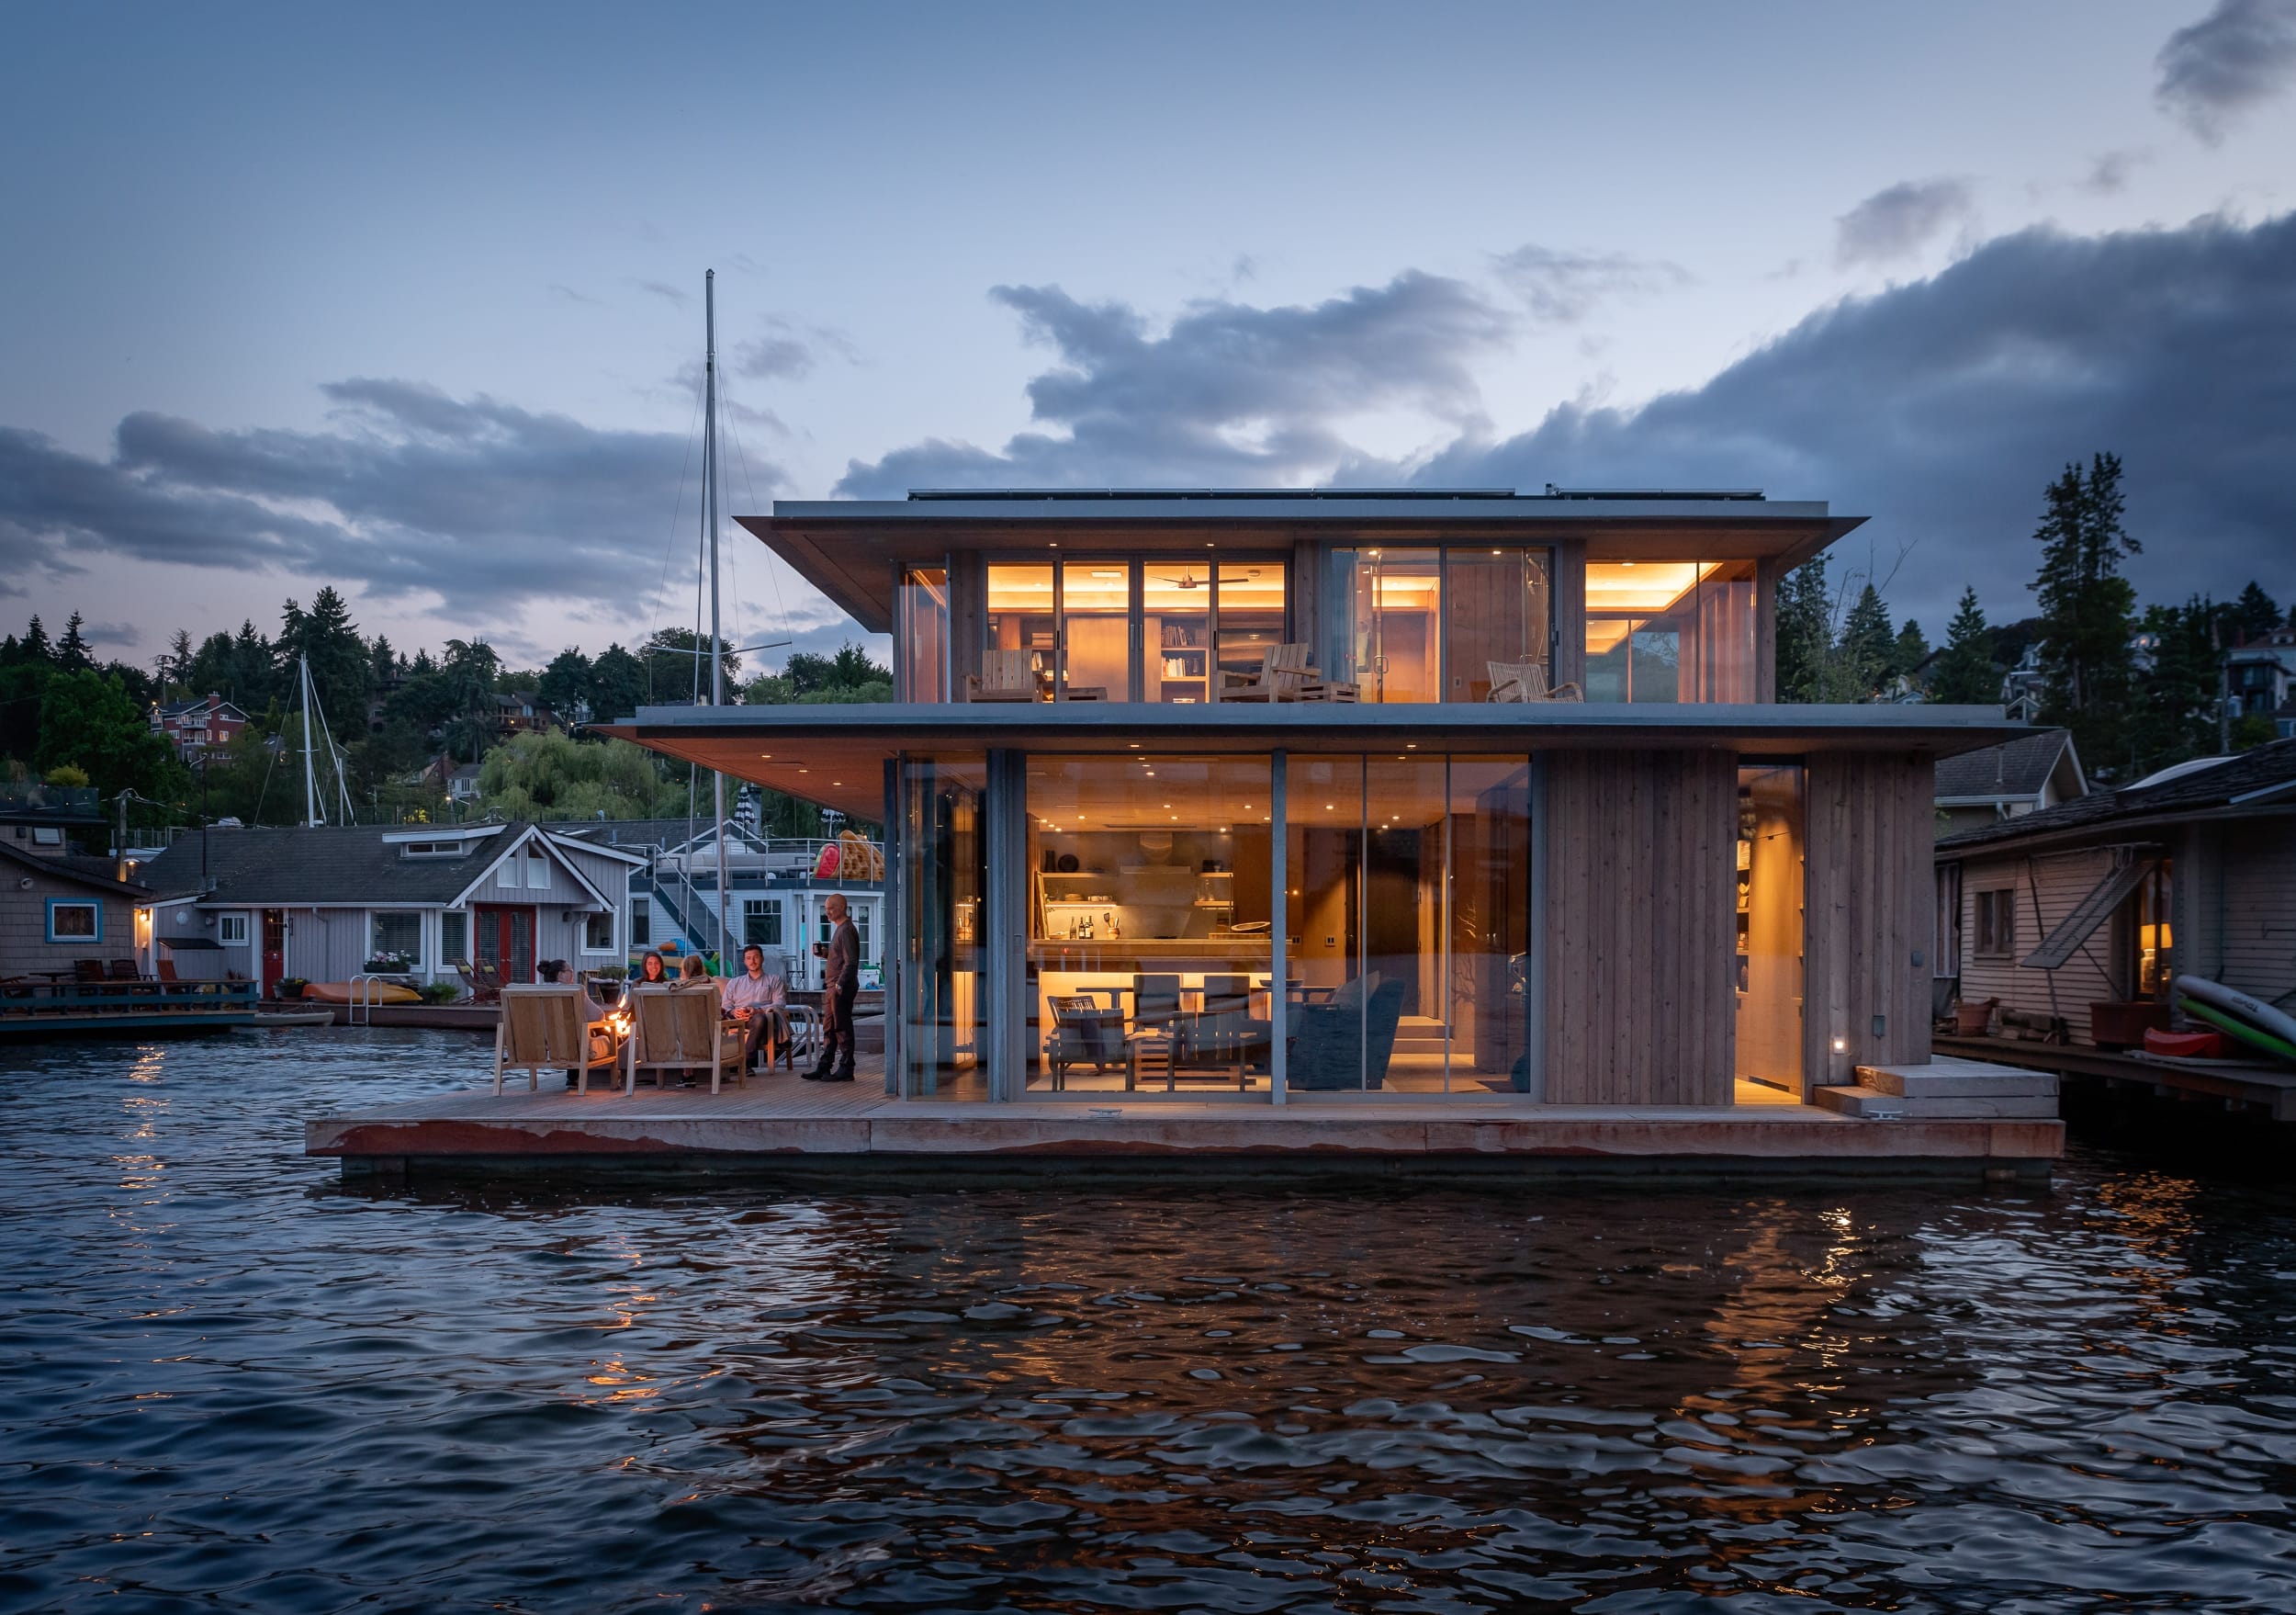 A floating home on the water at dusk, built by a skilled carpenter specializing in unique home building.